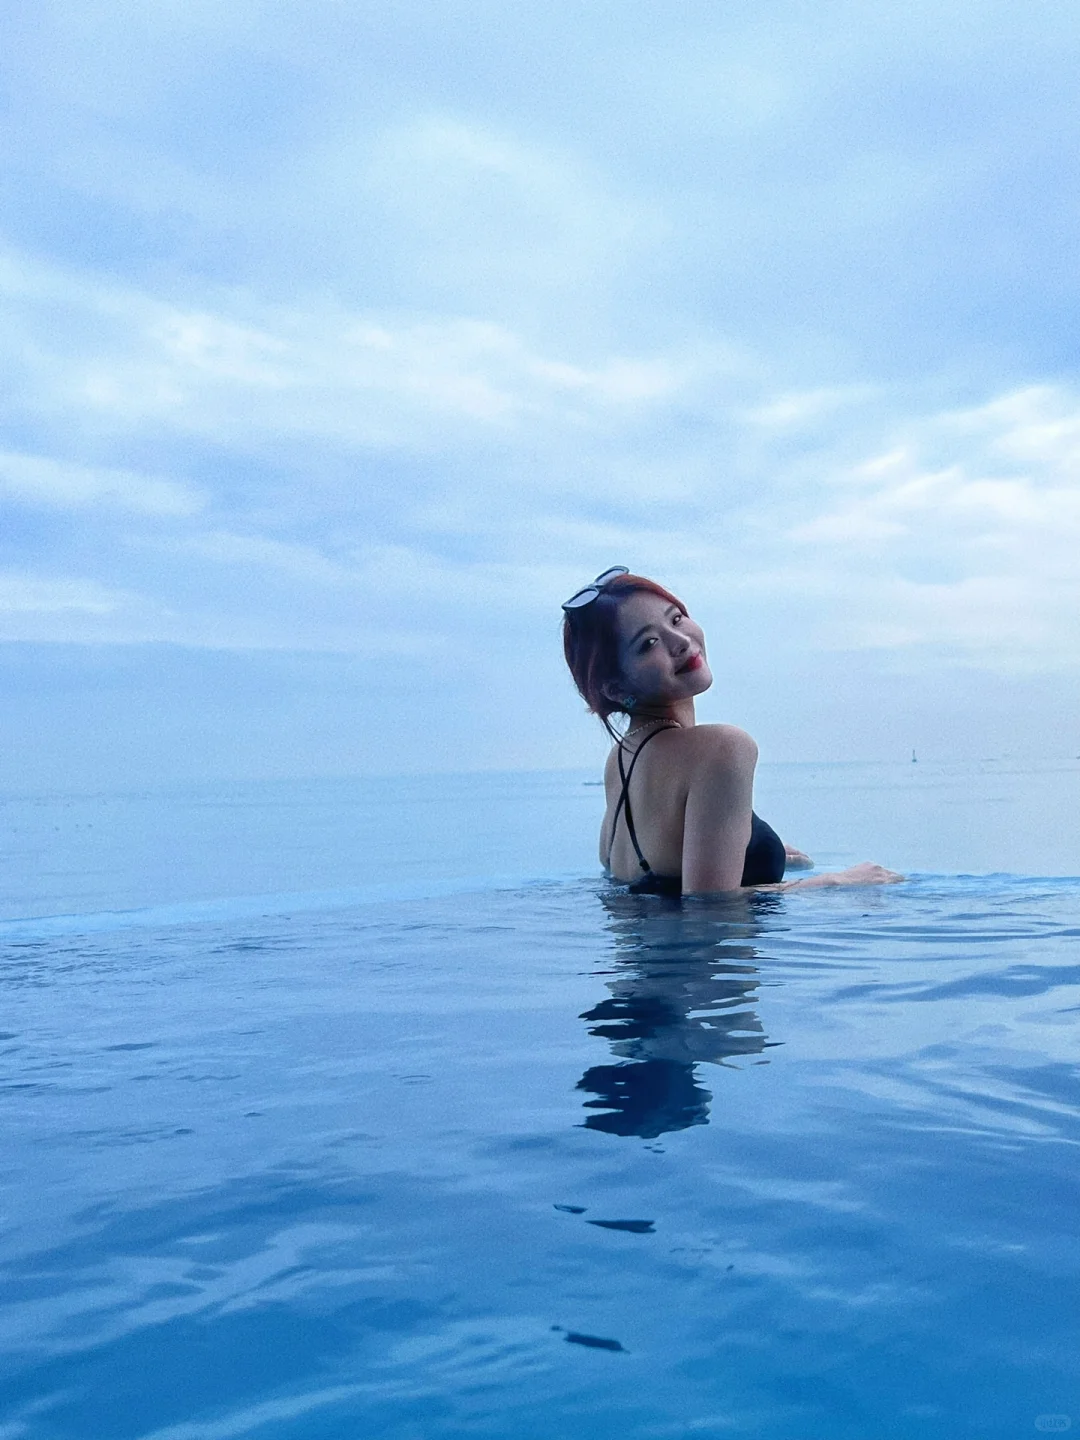 Busan/Jeju-Travel to Busan🌊, stay at the 타이드어웨이 Hotel and experience the infinity pool